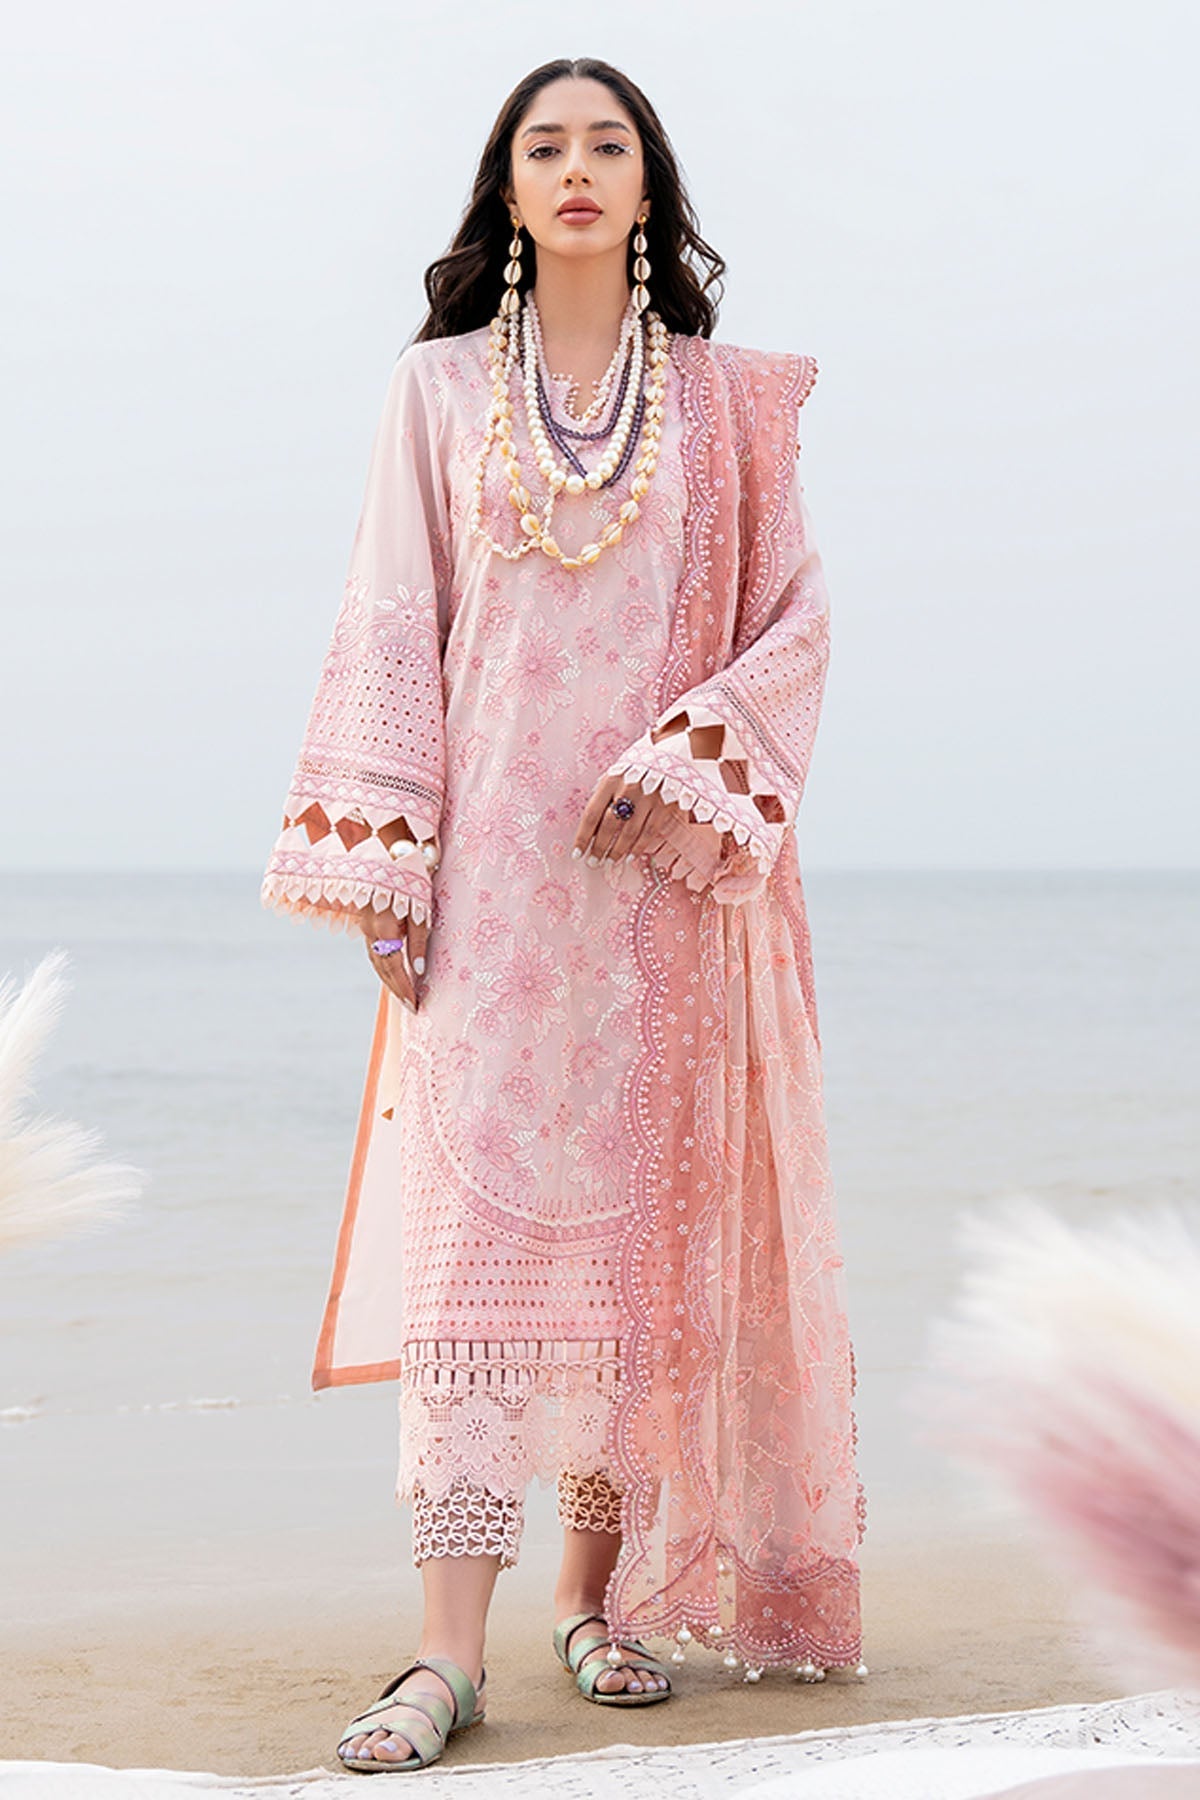  Everbloom - Tere Sang - Swiss Lawn - Nureh Summer Collection 2023 - Shahana Collection Uk